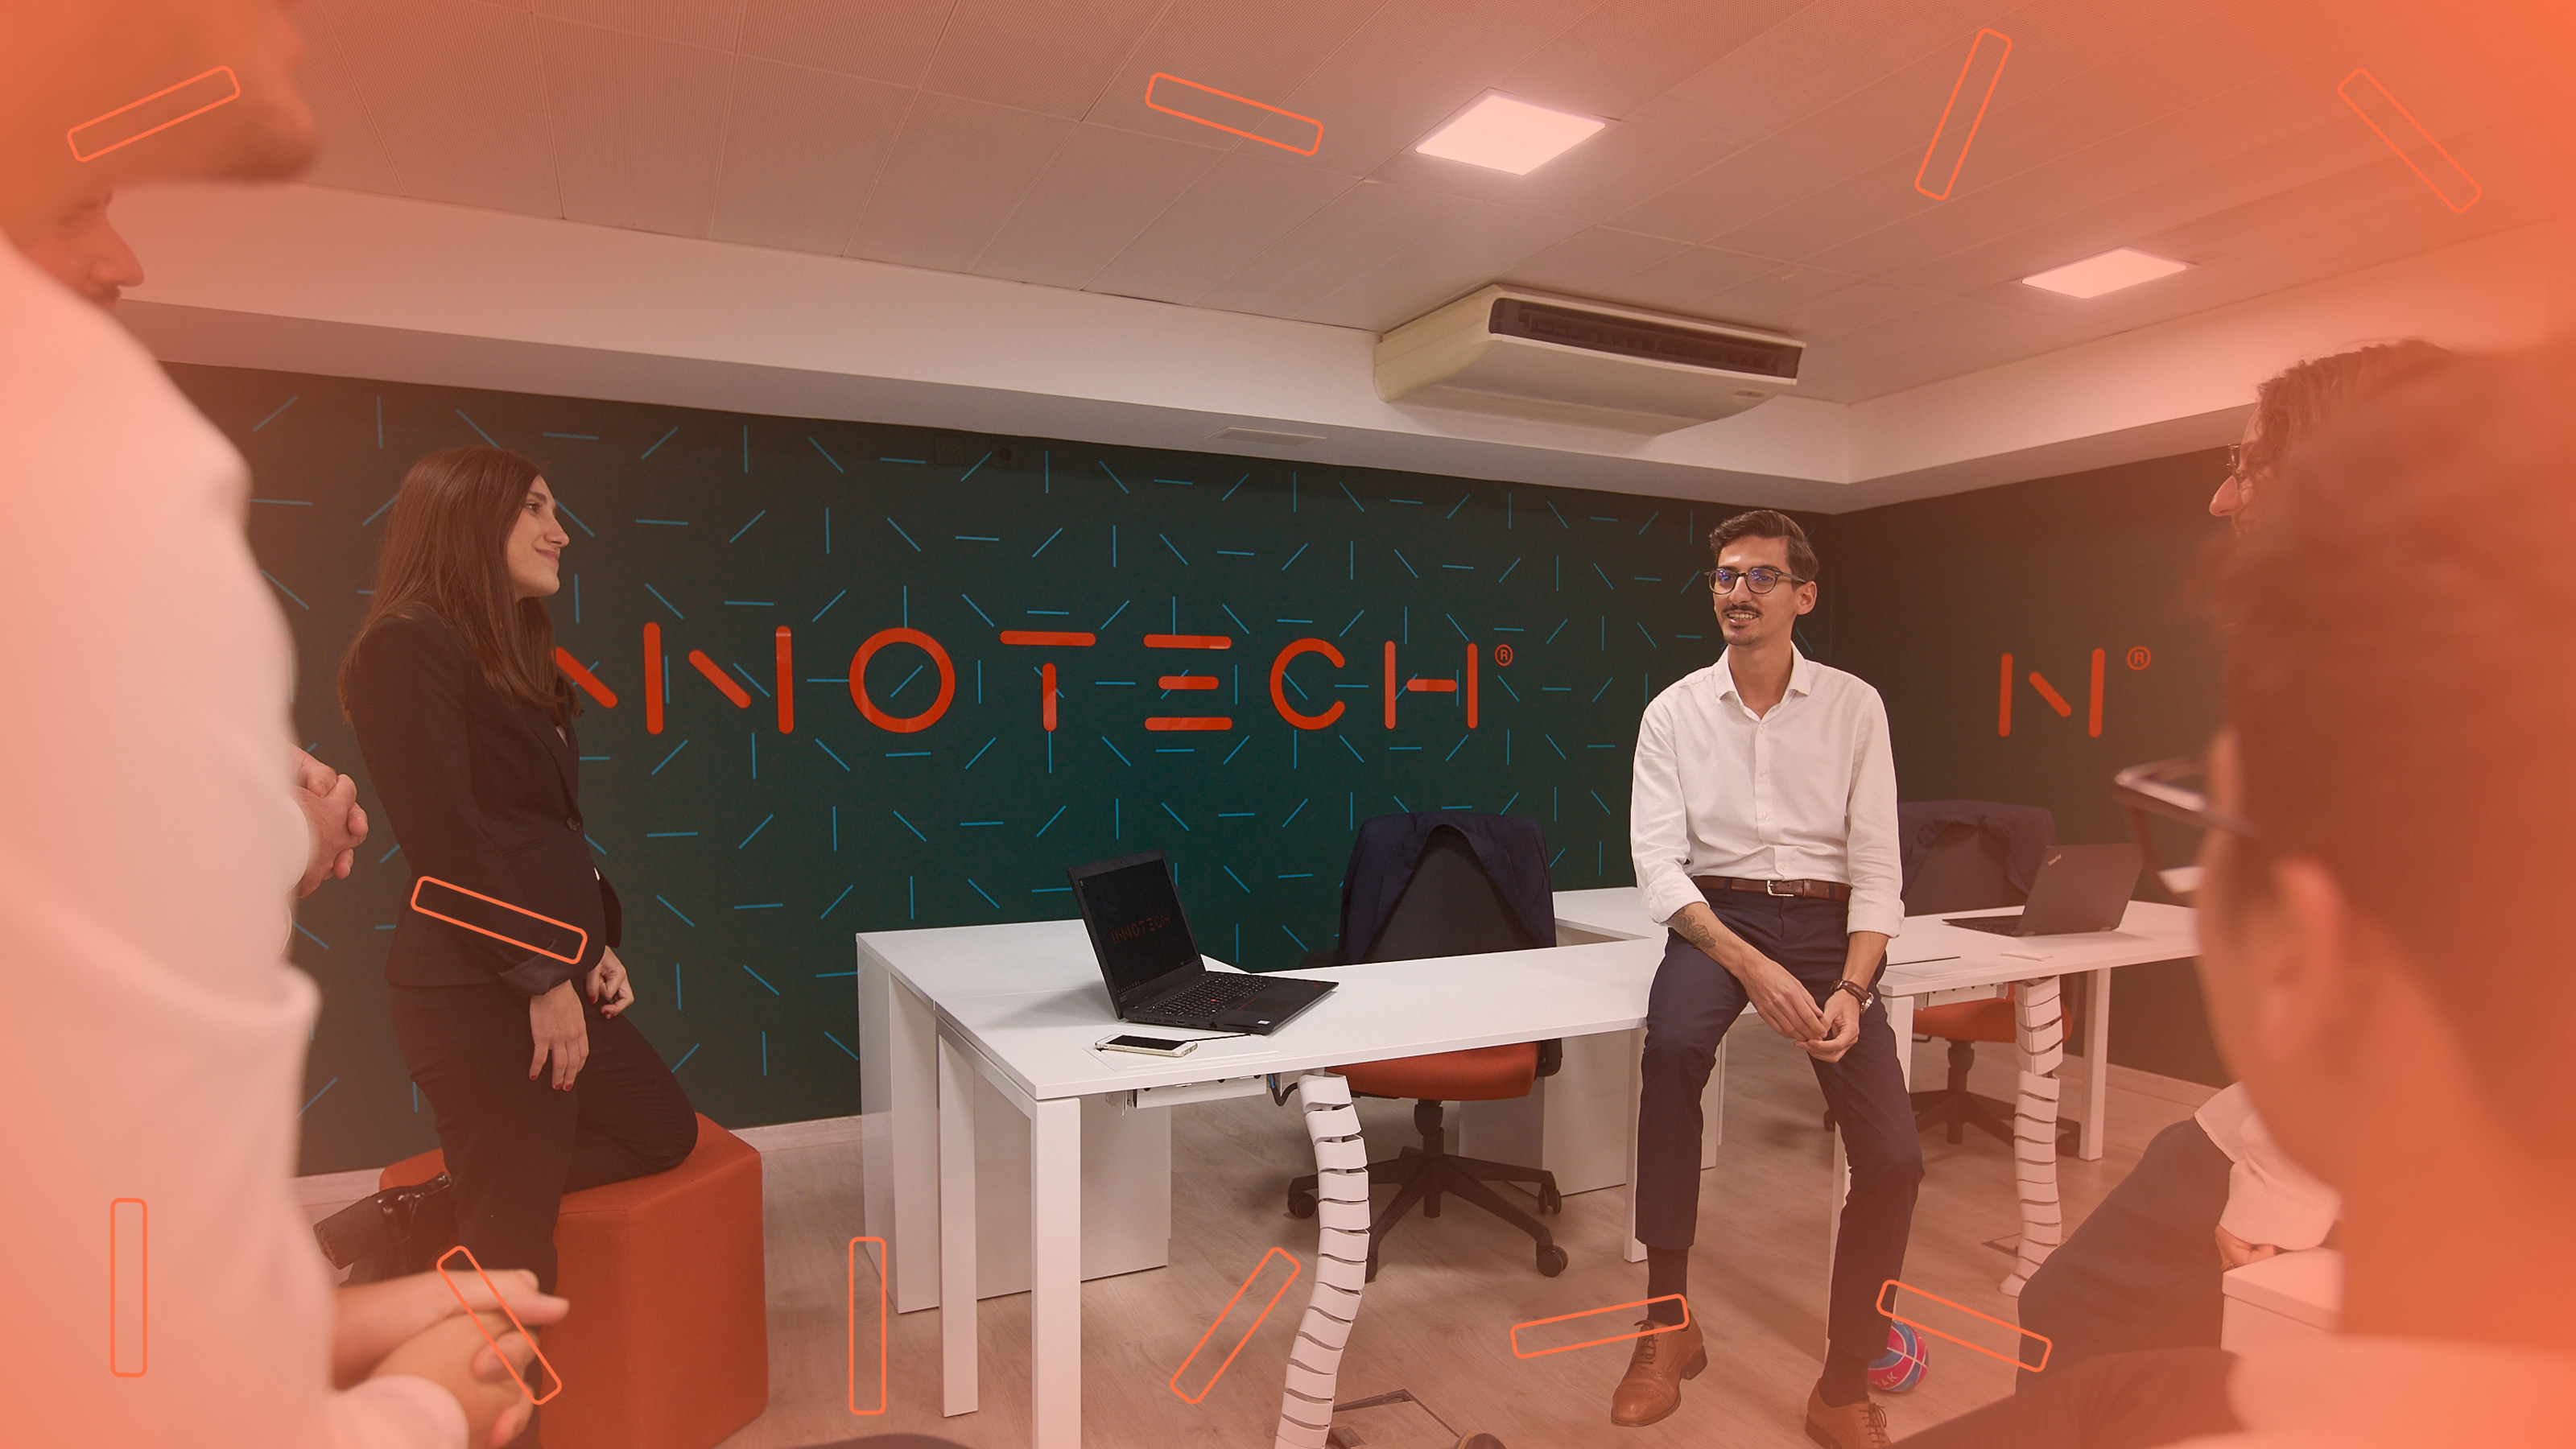 InnoTech reaches €2M turnover milestone in less than 2 years and wants to recruit 120 talents in 2022